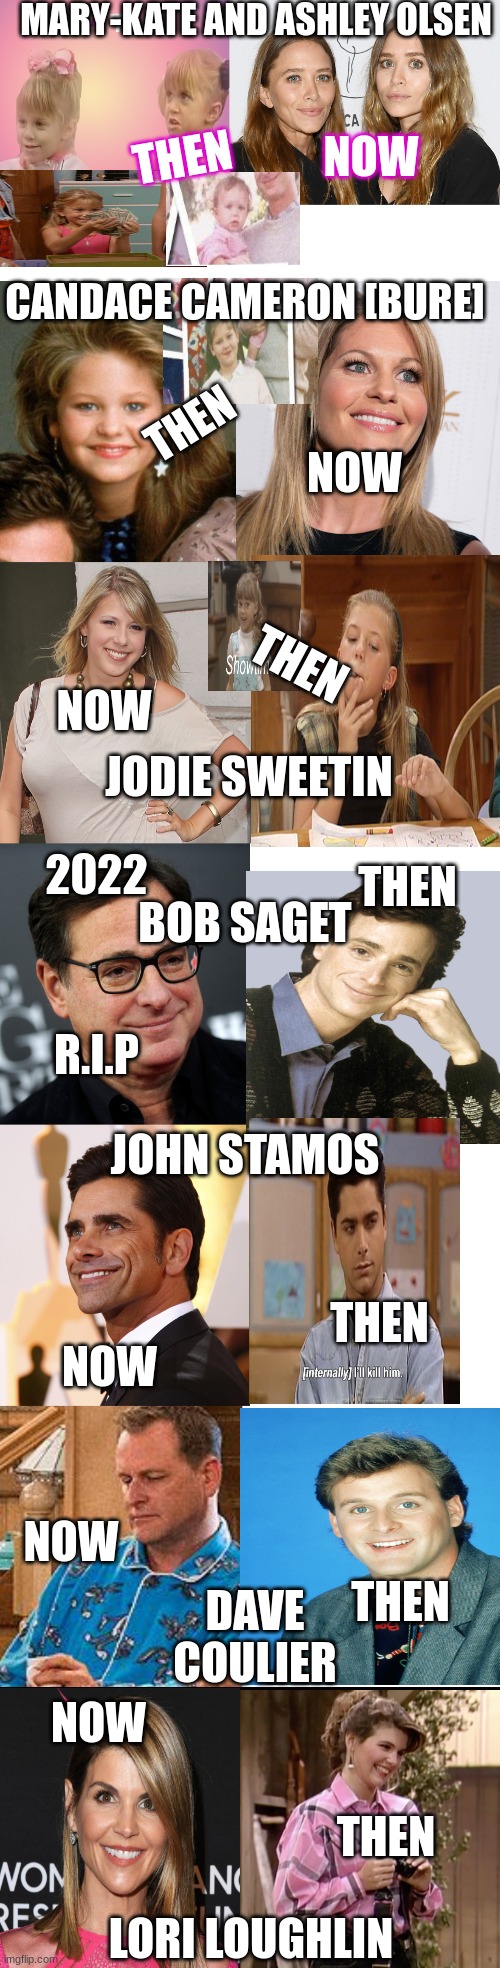 comment if you think they aged well BTW I SPENT HOURS EDITING THIS | THEN; MARY-KATE AND ASHLEY OLSEN; NOW; CANDACE CAMERON [BURE]; THEN; NOW; THEN; NOW; JODIE SWEETIN; 2022; THEN; BOB SAGET; R.I.P; JOHN STAMOS; THEN; NOW; NOW; THEN; DAVE COULIER; NOW; THEN; LORI LOUGHLIN | image tagged in full house,then and now,funny meme | made w/ Imgflip meme maker